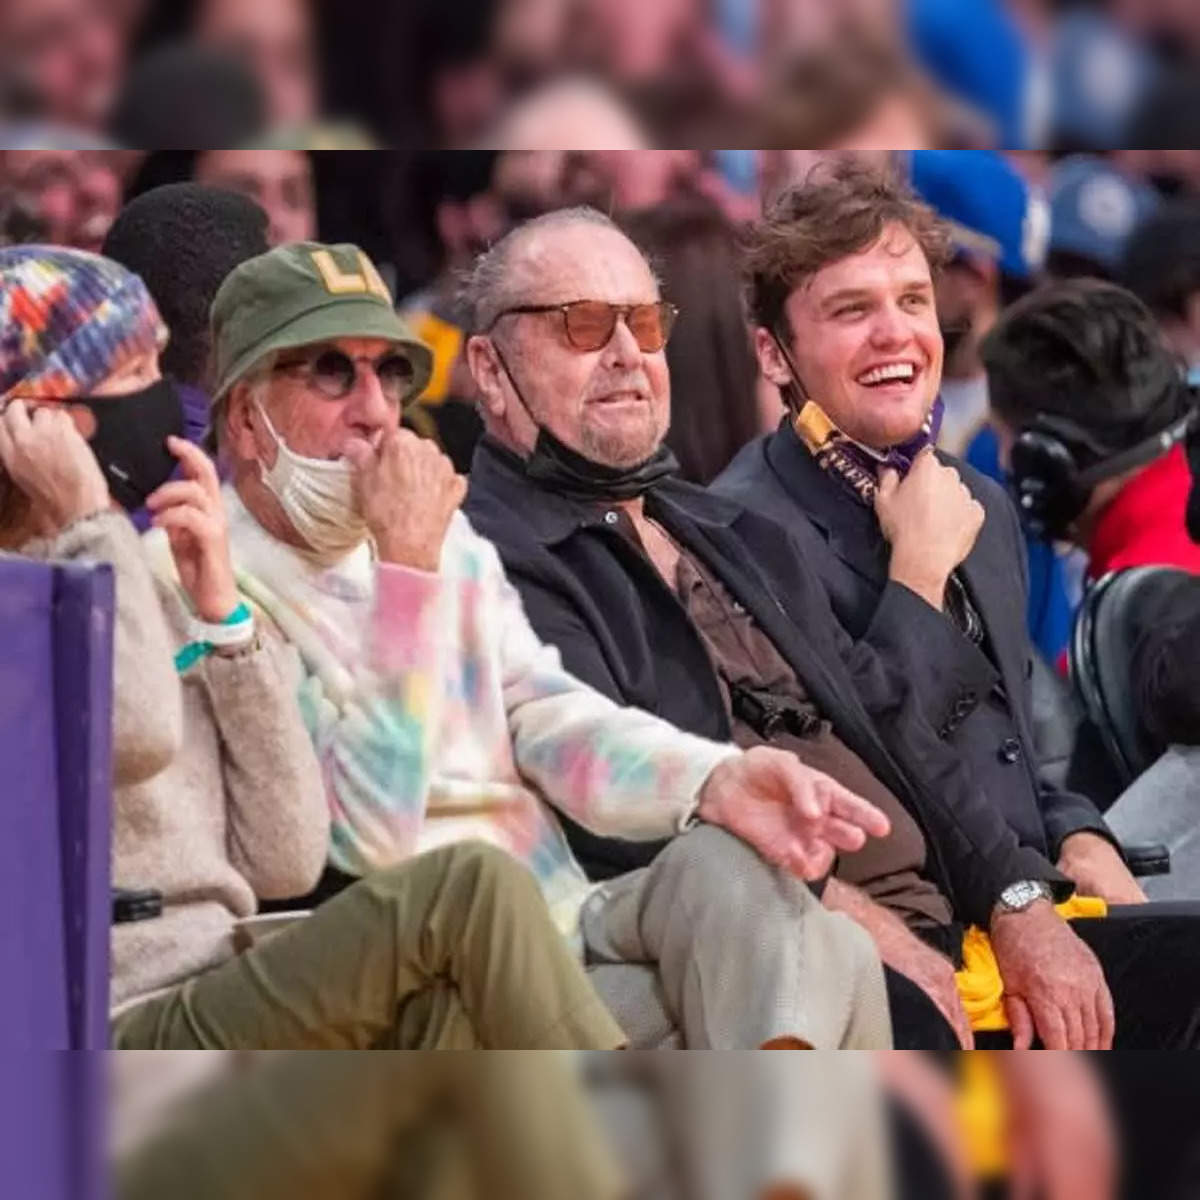 At Lakers Playoff Game After 2021